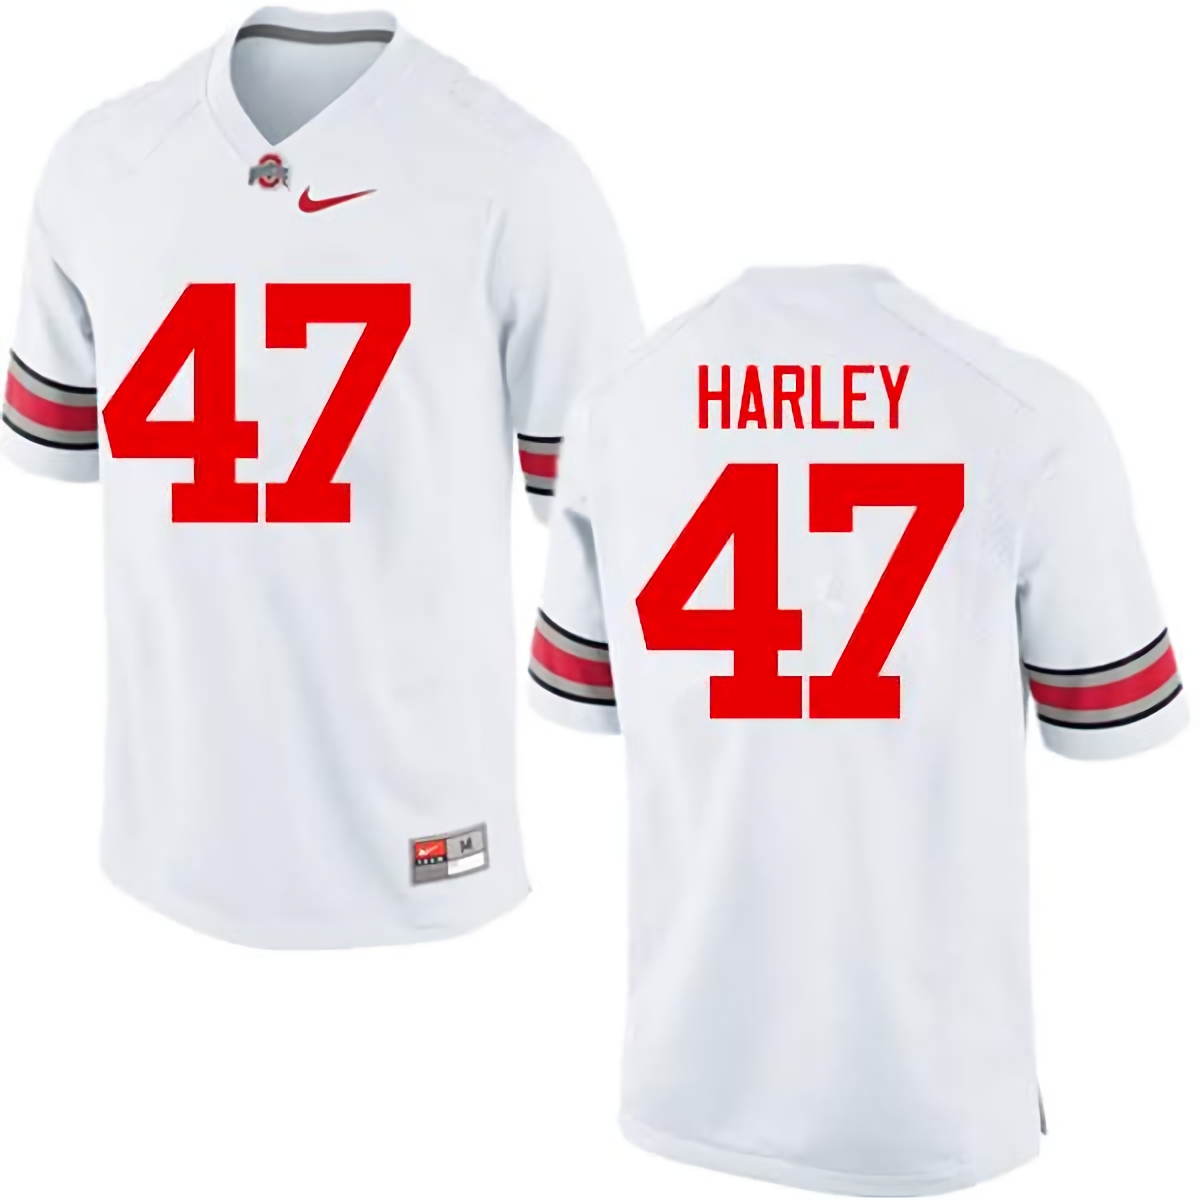 Chic Harley Ohio State Buckeyes Men's NCAA #47 Nike White College Stitched Football Jersey VIS1156MQ